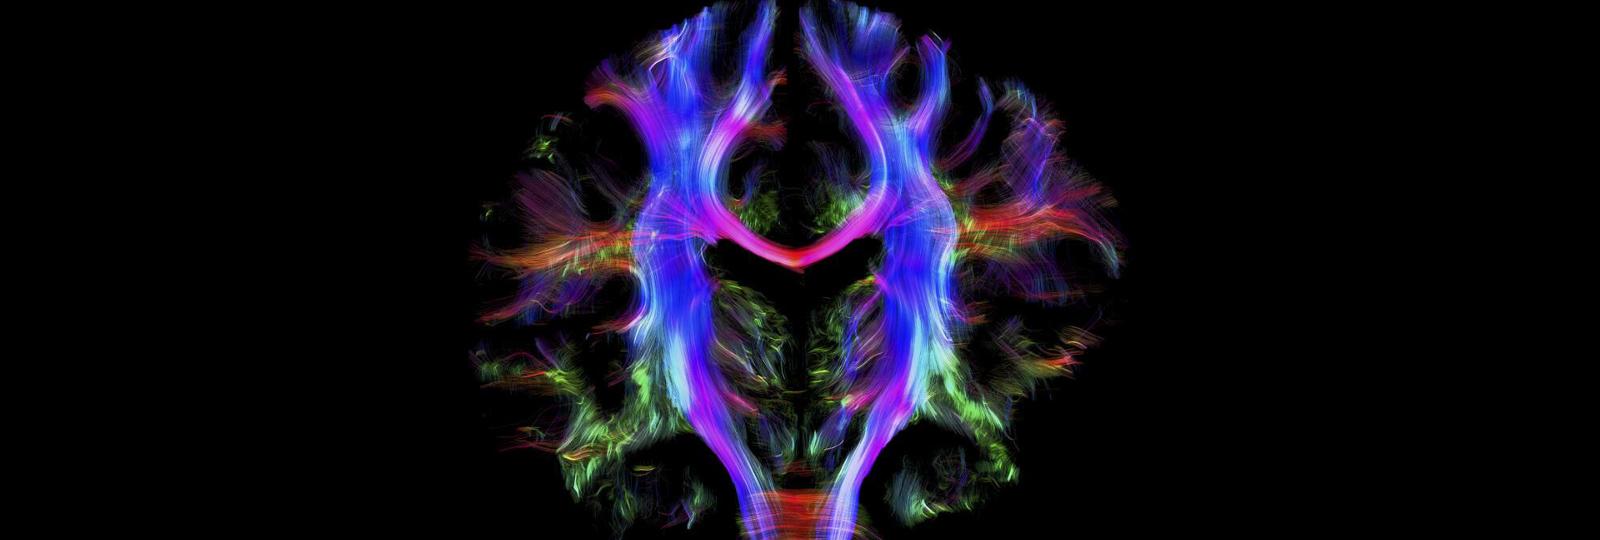 From stimulation of neurons by light to artificial intelligence to analyze MRI scans